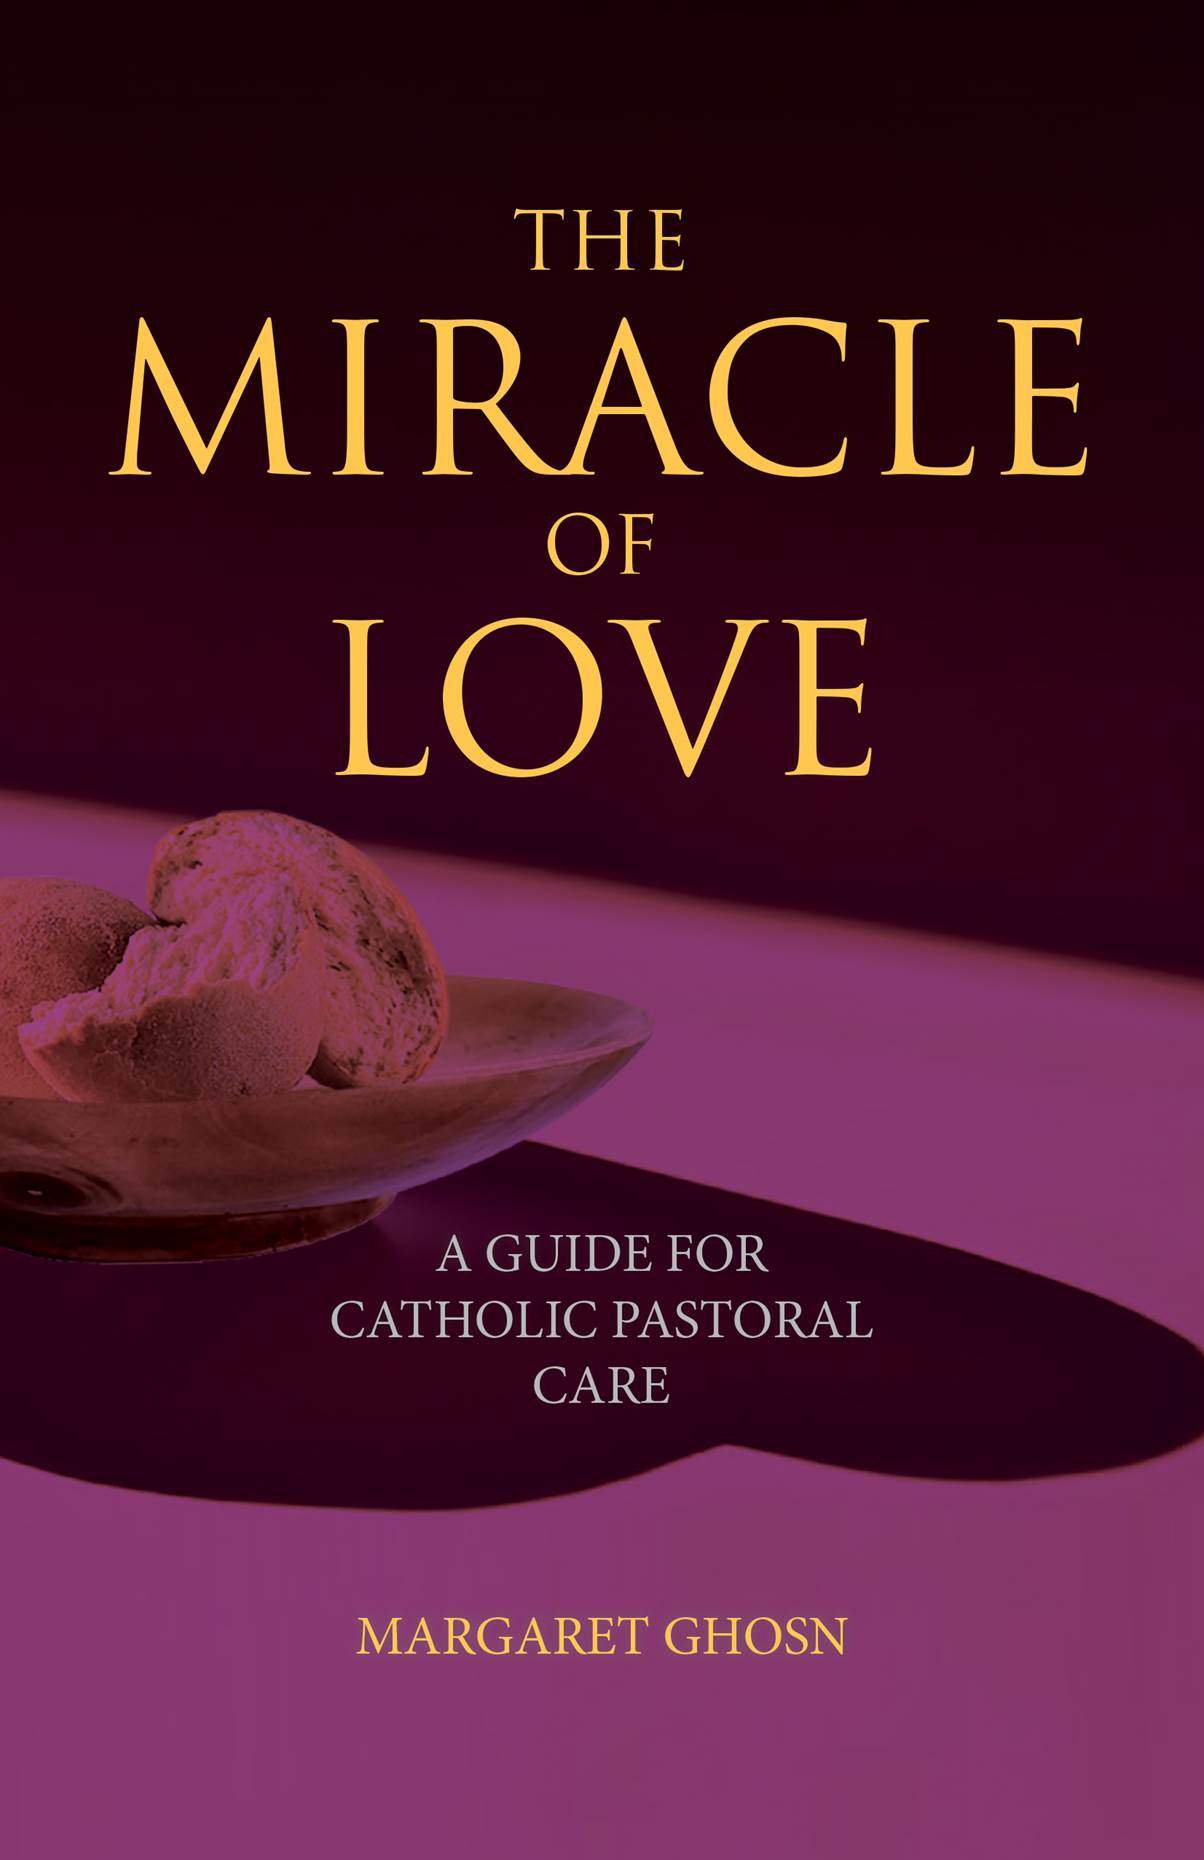 The Miracle of Love  A Guide for Catholic Pastoral Care / Margaret Ghosn